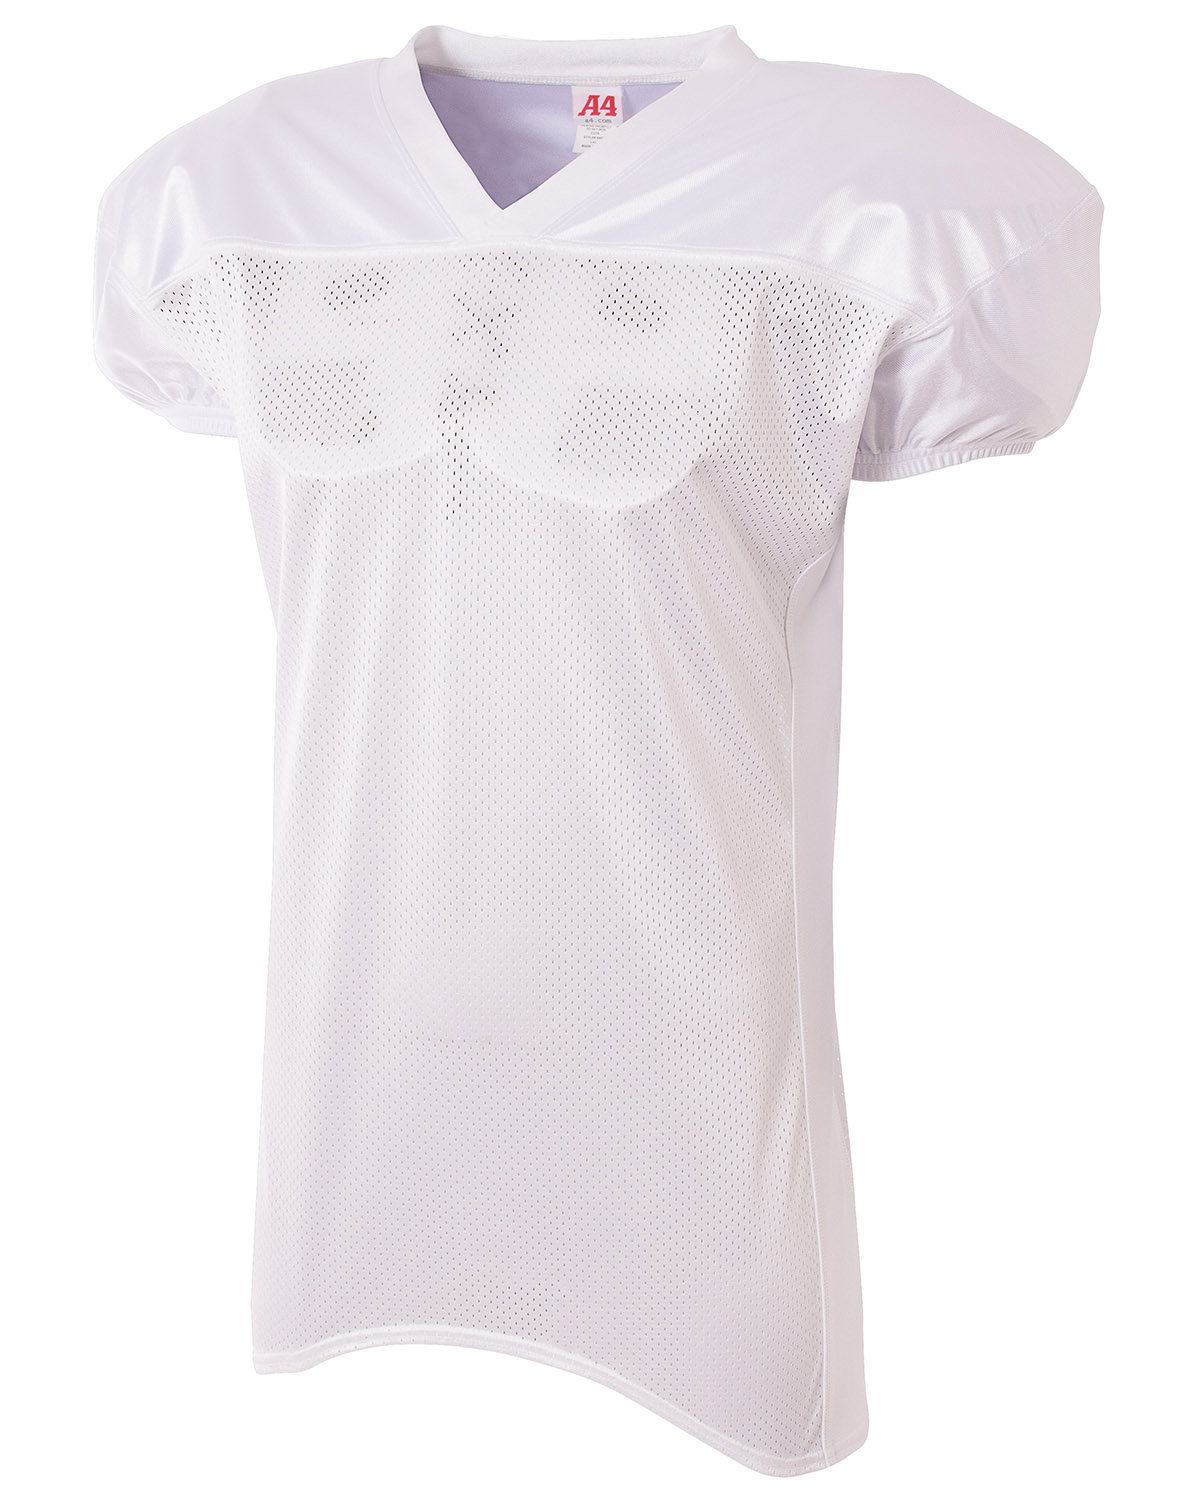 Adult Nickleback Tricot Body Skill Sleeve Football Jersey-A4